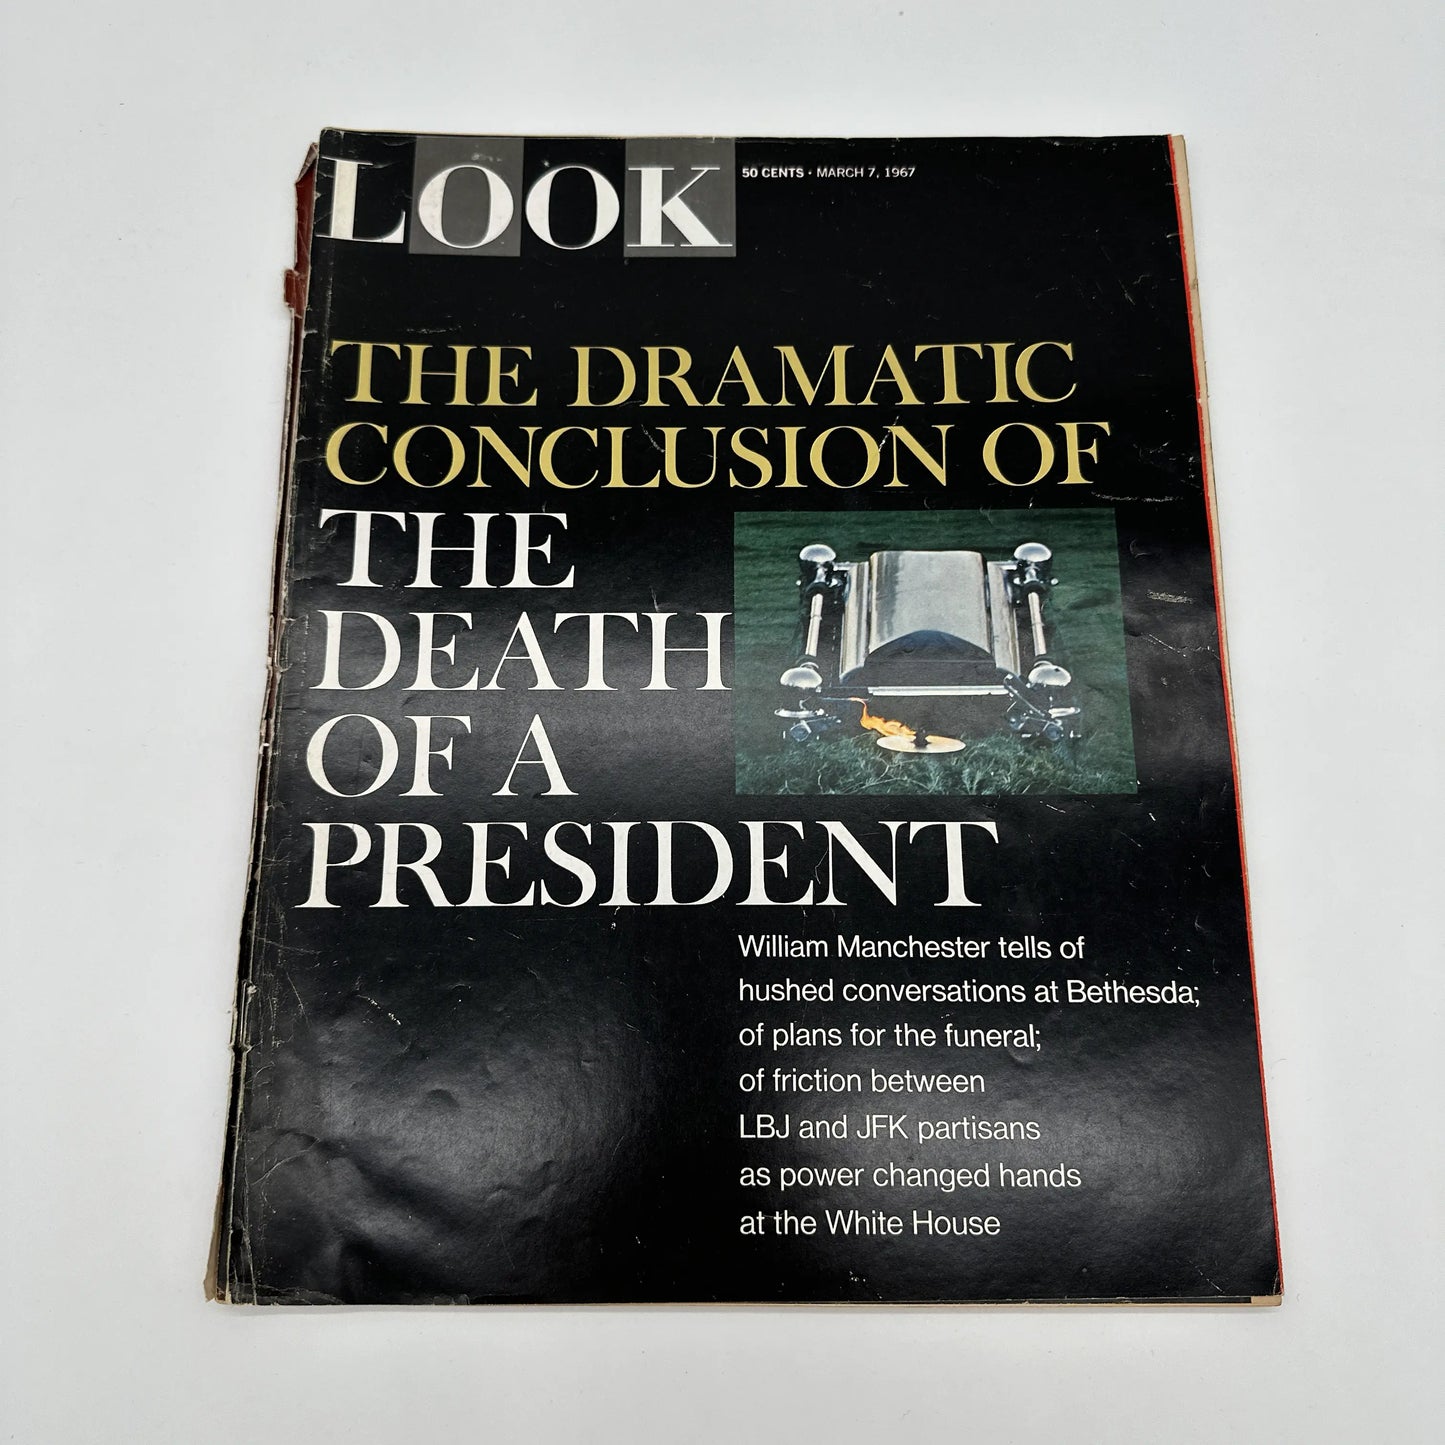 The Life and Death of John F. Kennedy — Collection of LOOK and LIFE Magazines